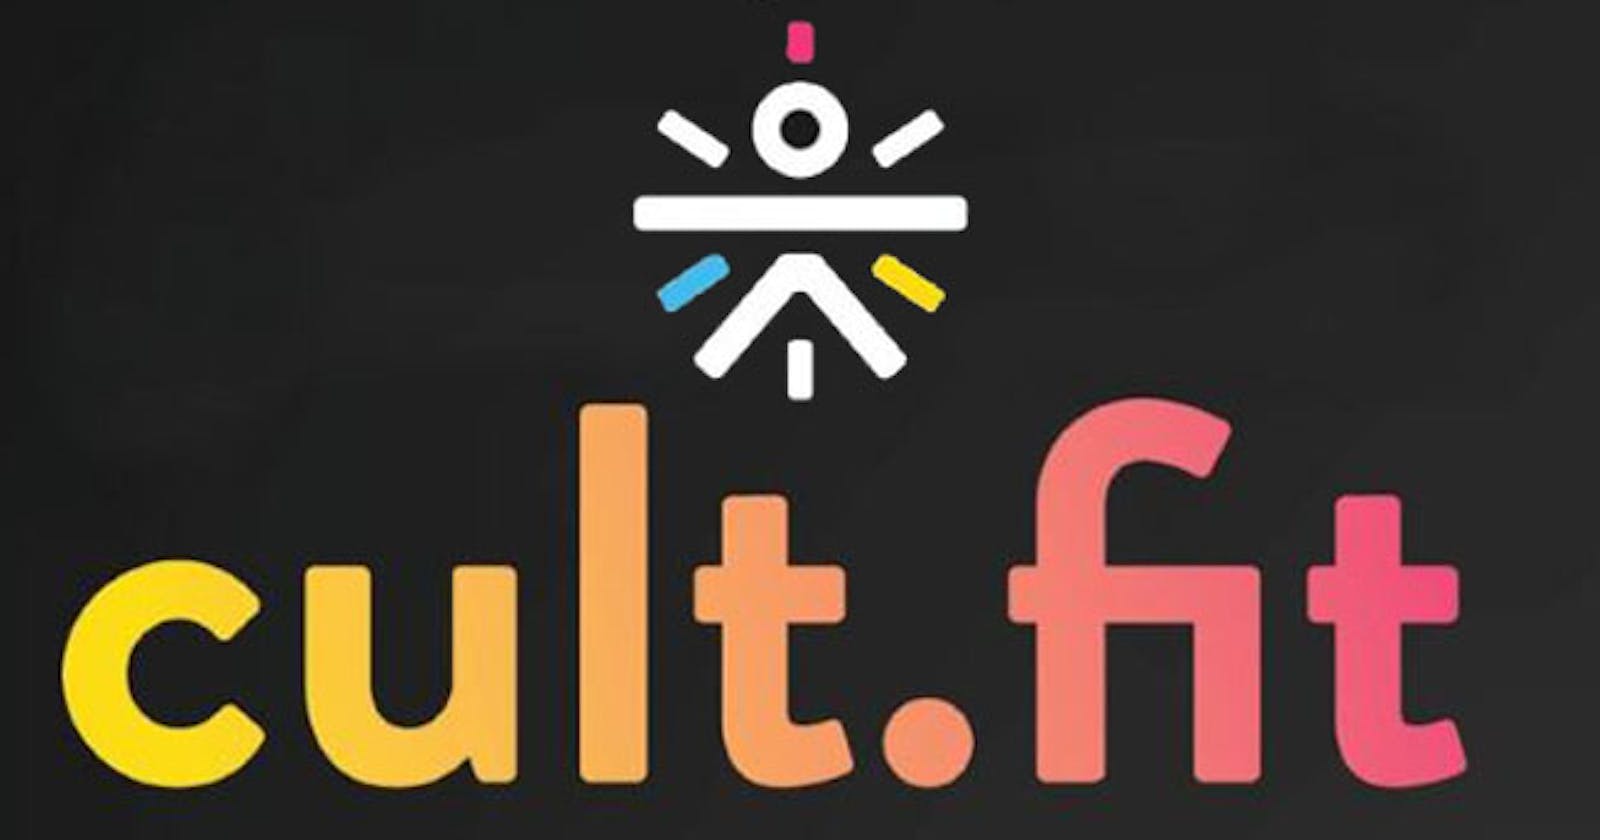 Building the clone of CultFit Website.